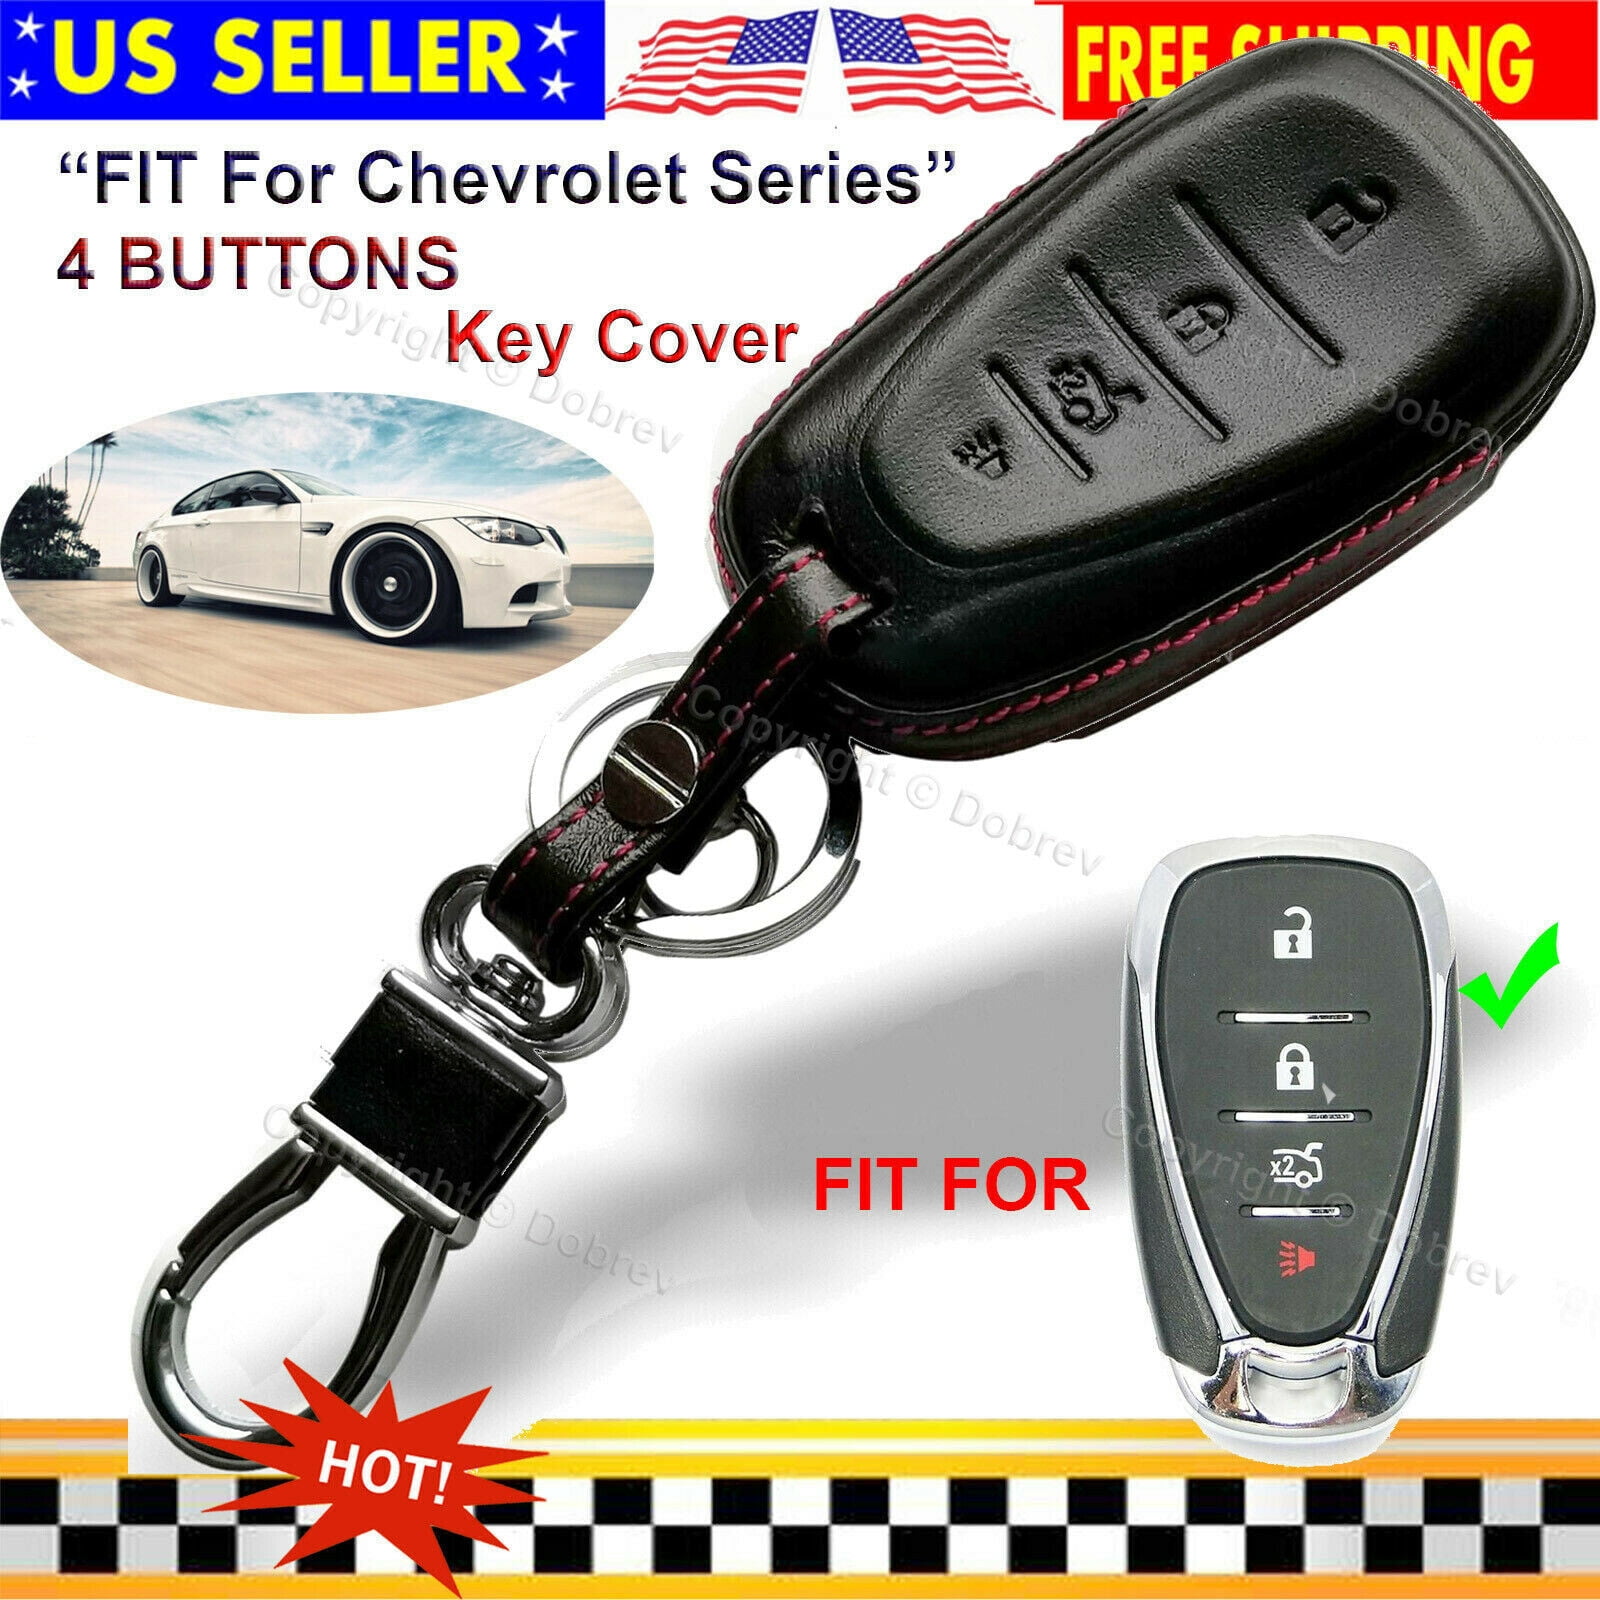 Alegender Rubber 5 Buttons Smart Key Cover Case Fob Skin Bag Remote Jacket Protector Fit for 2017 2018 2019 Chevy Malibu Camaro Sonic Cruze Volt Equinox Spark 2 Qty 